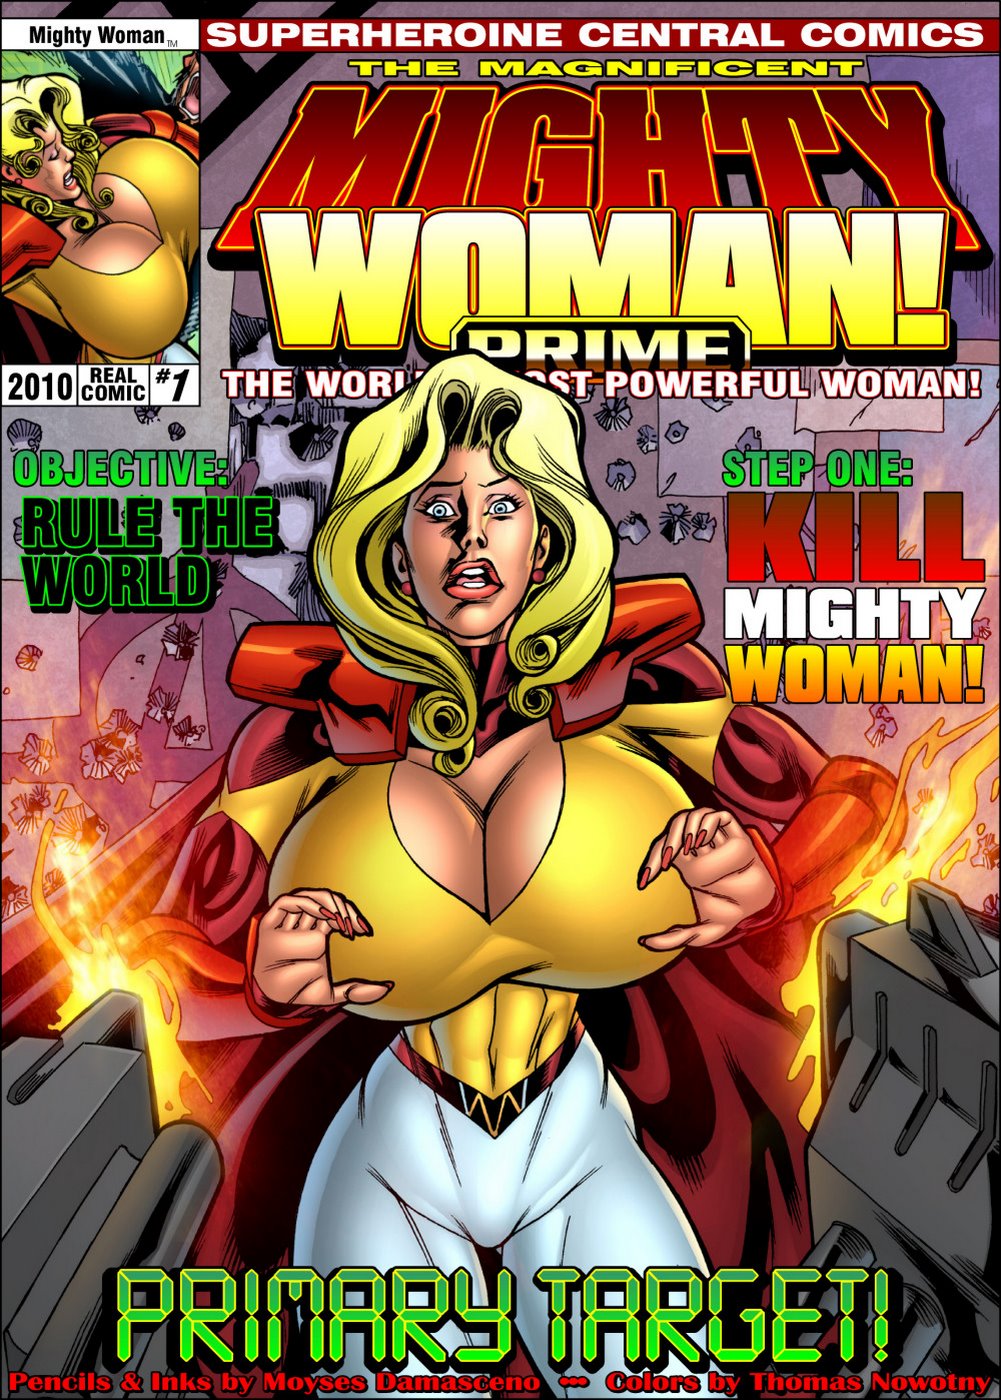 Mighty Woman Prime in Primary Target- Superheroine Central